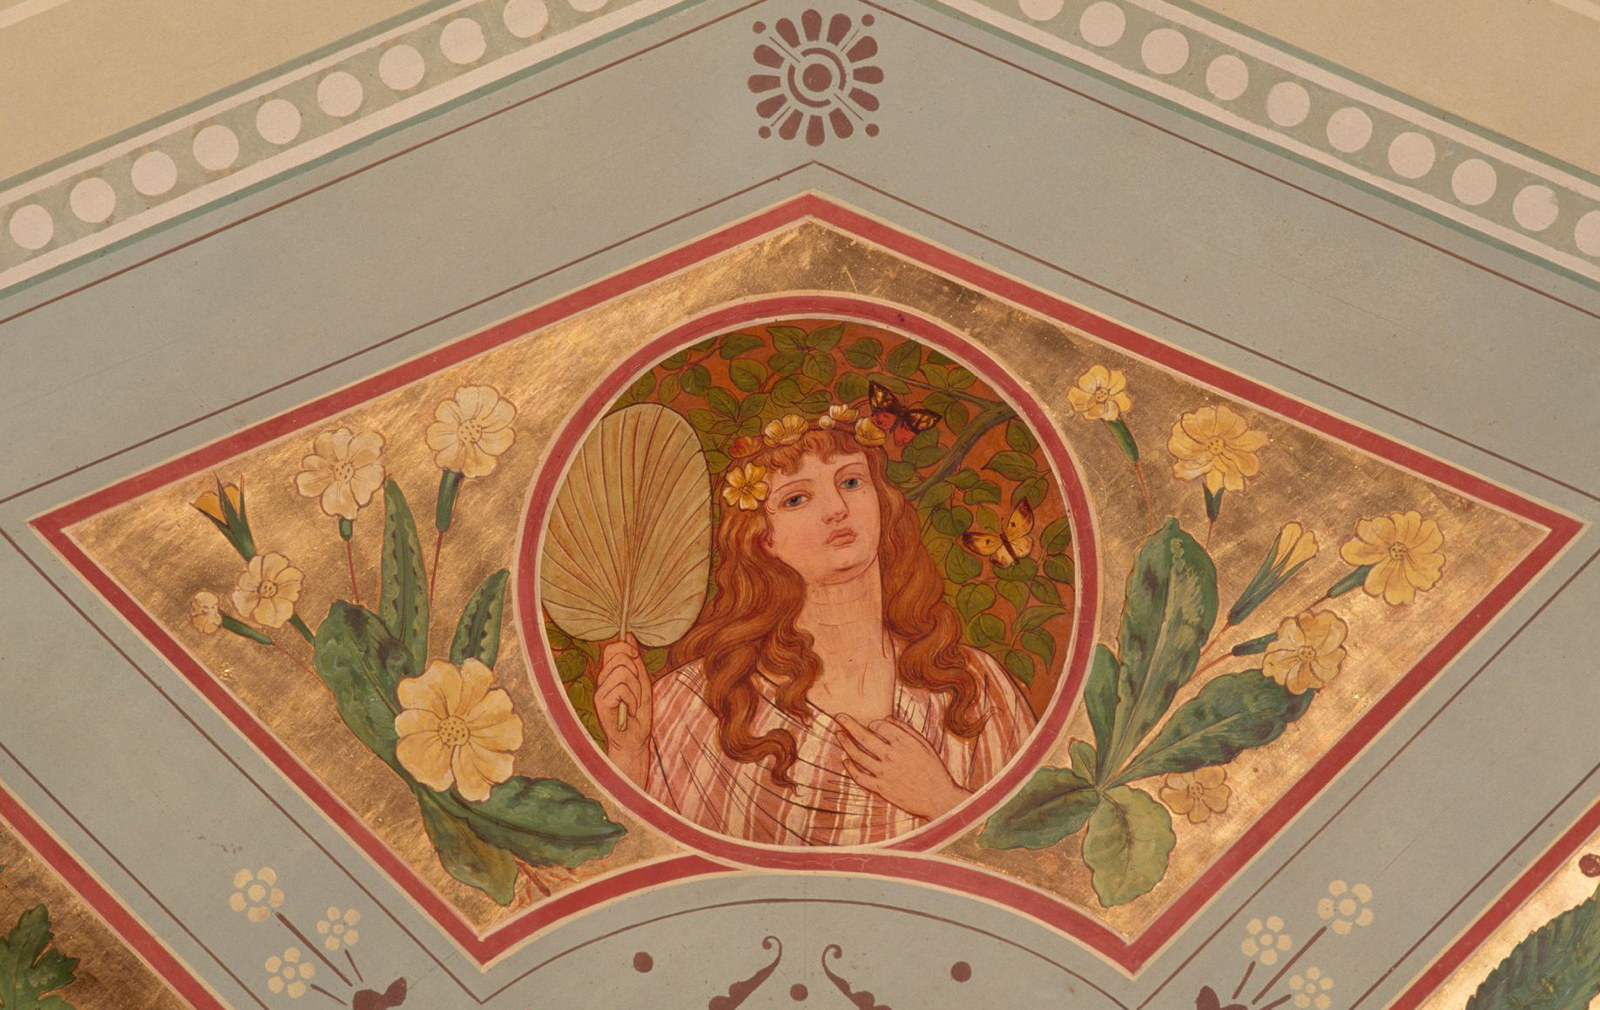 The â€˜reclining womanâ€™ motif is adapted to represent â€˜Summerâ€™ as ceiling decoration in the drawing room at Government House